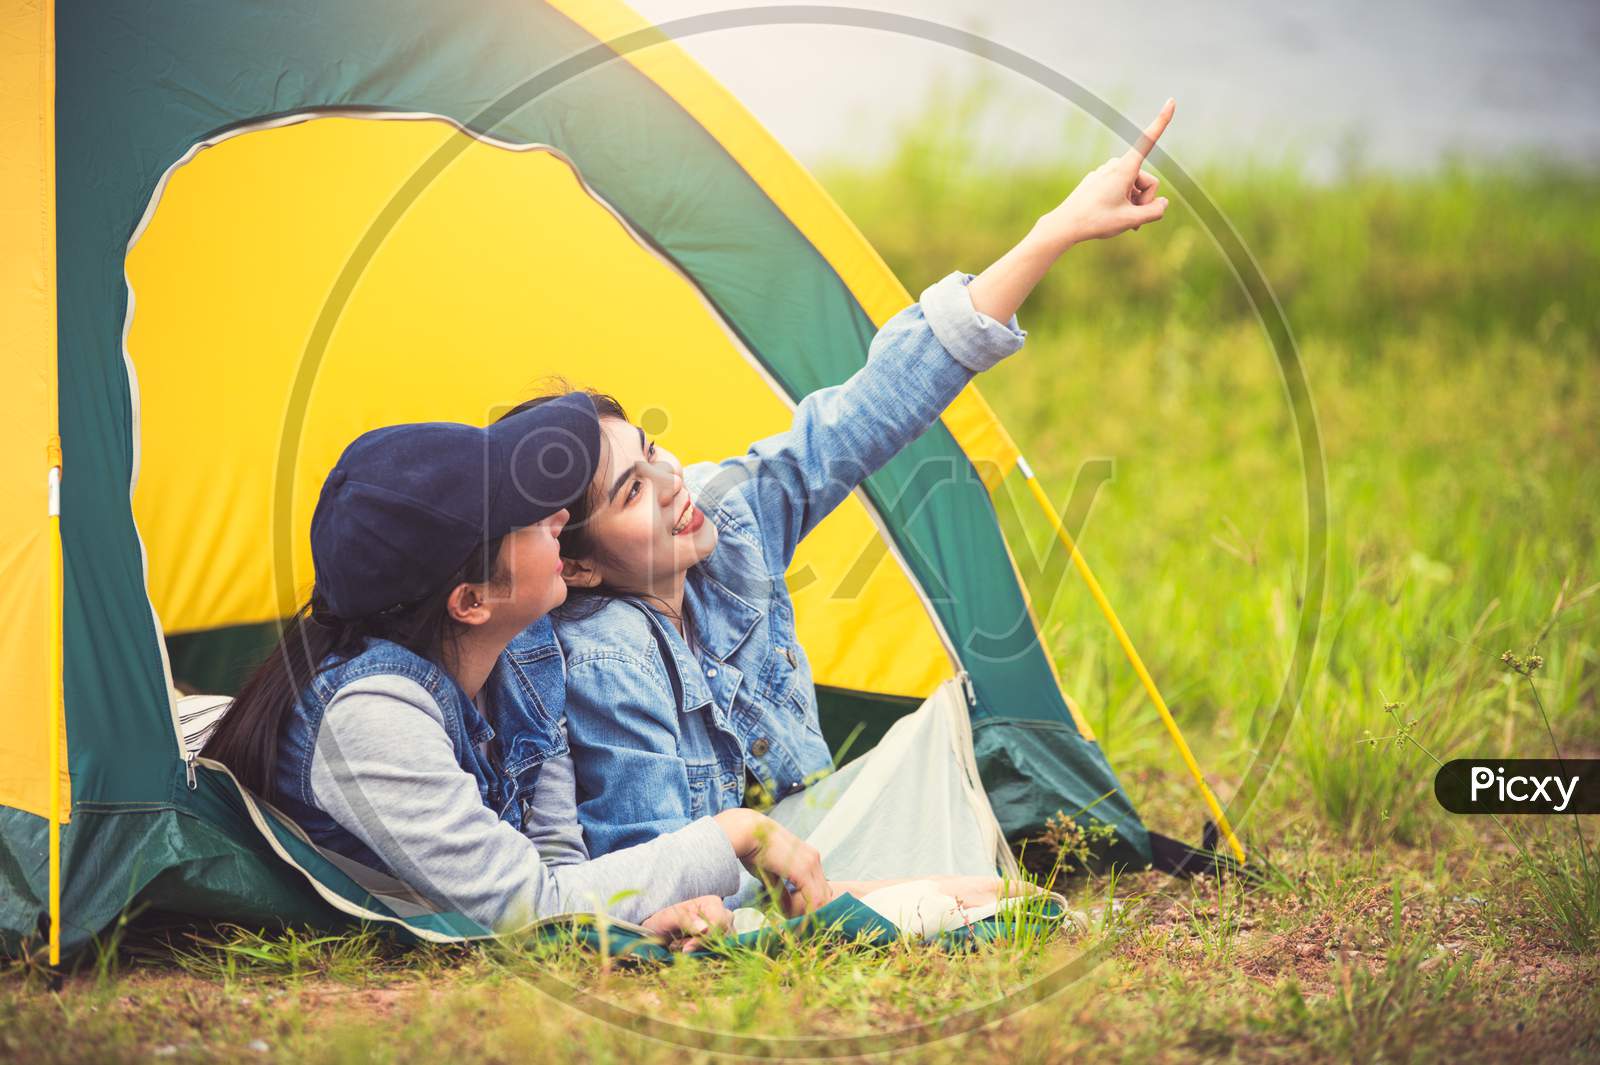 Two Close Friend Asian Friendship Relax In Camping Tent In Green Meadow On Lake Side View Background. Girl Pointing Finger To Sky. People Lifestyle Travel On Vacation Concept. Summer Picnic Activity